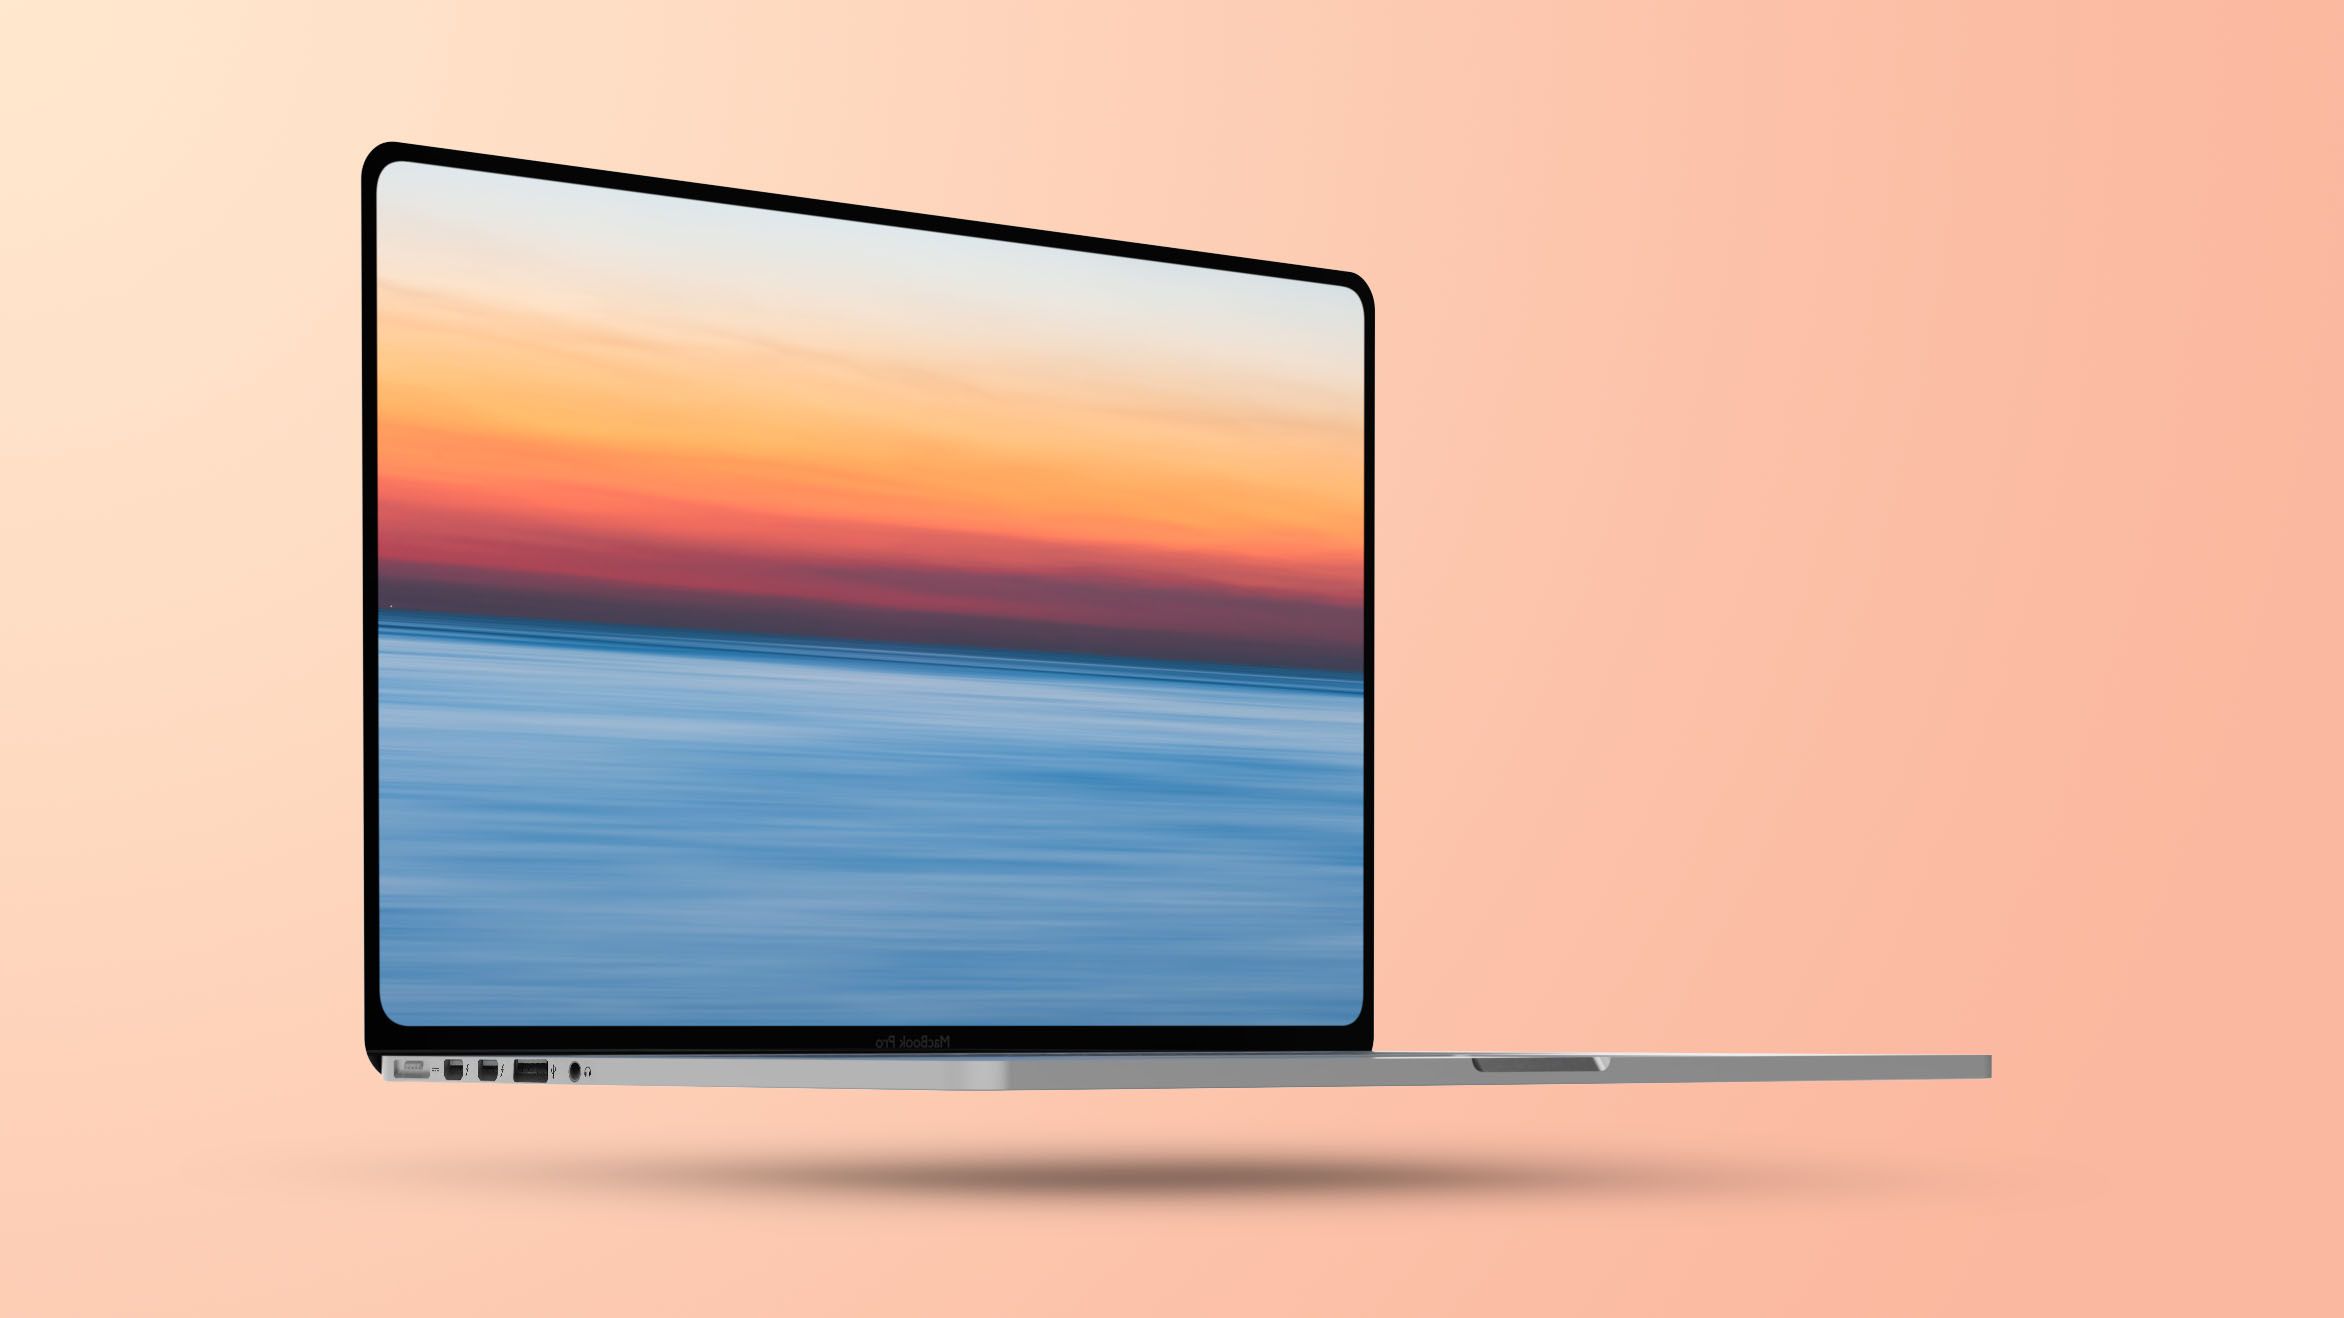 Kuo: New MacBook Pro Models to Feature Flat-Edged Design, MagSafe, No